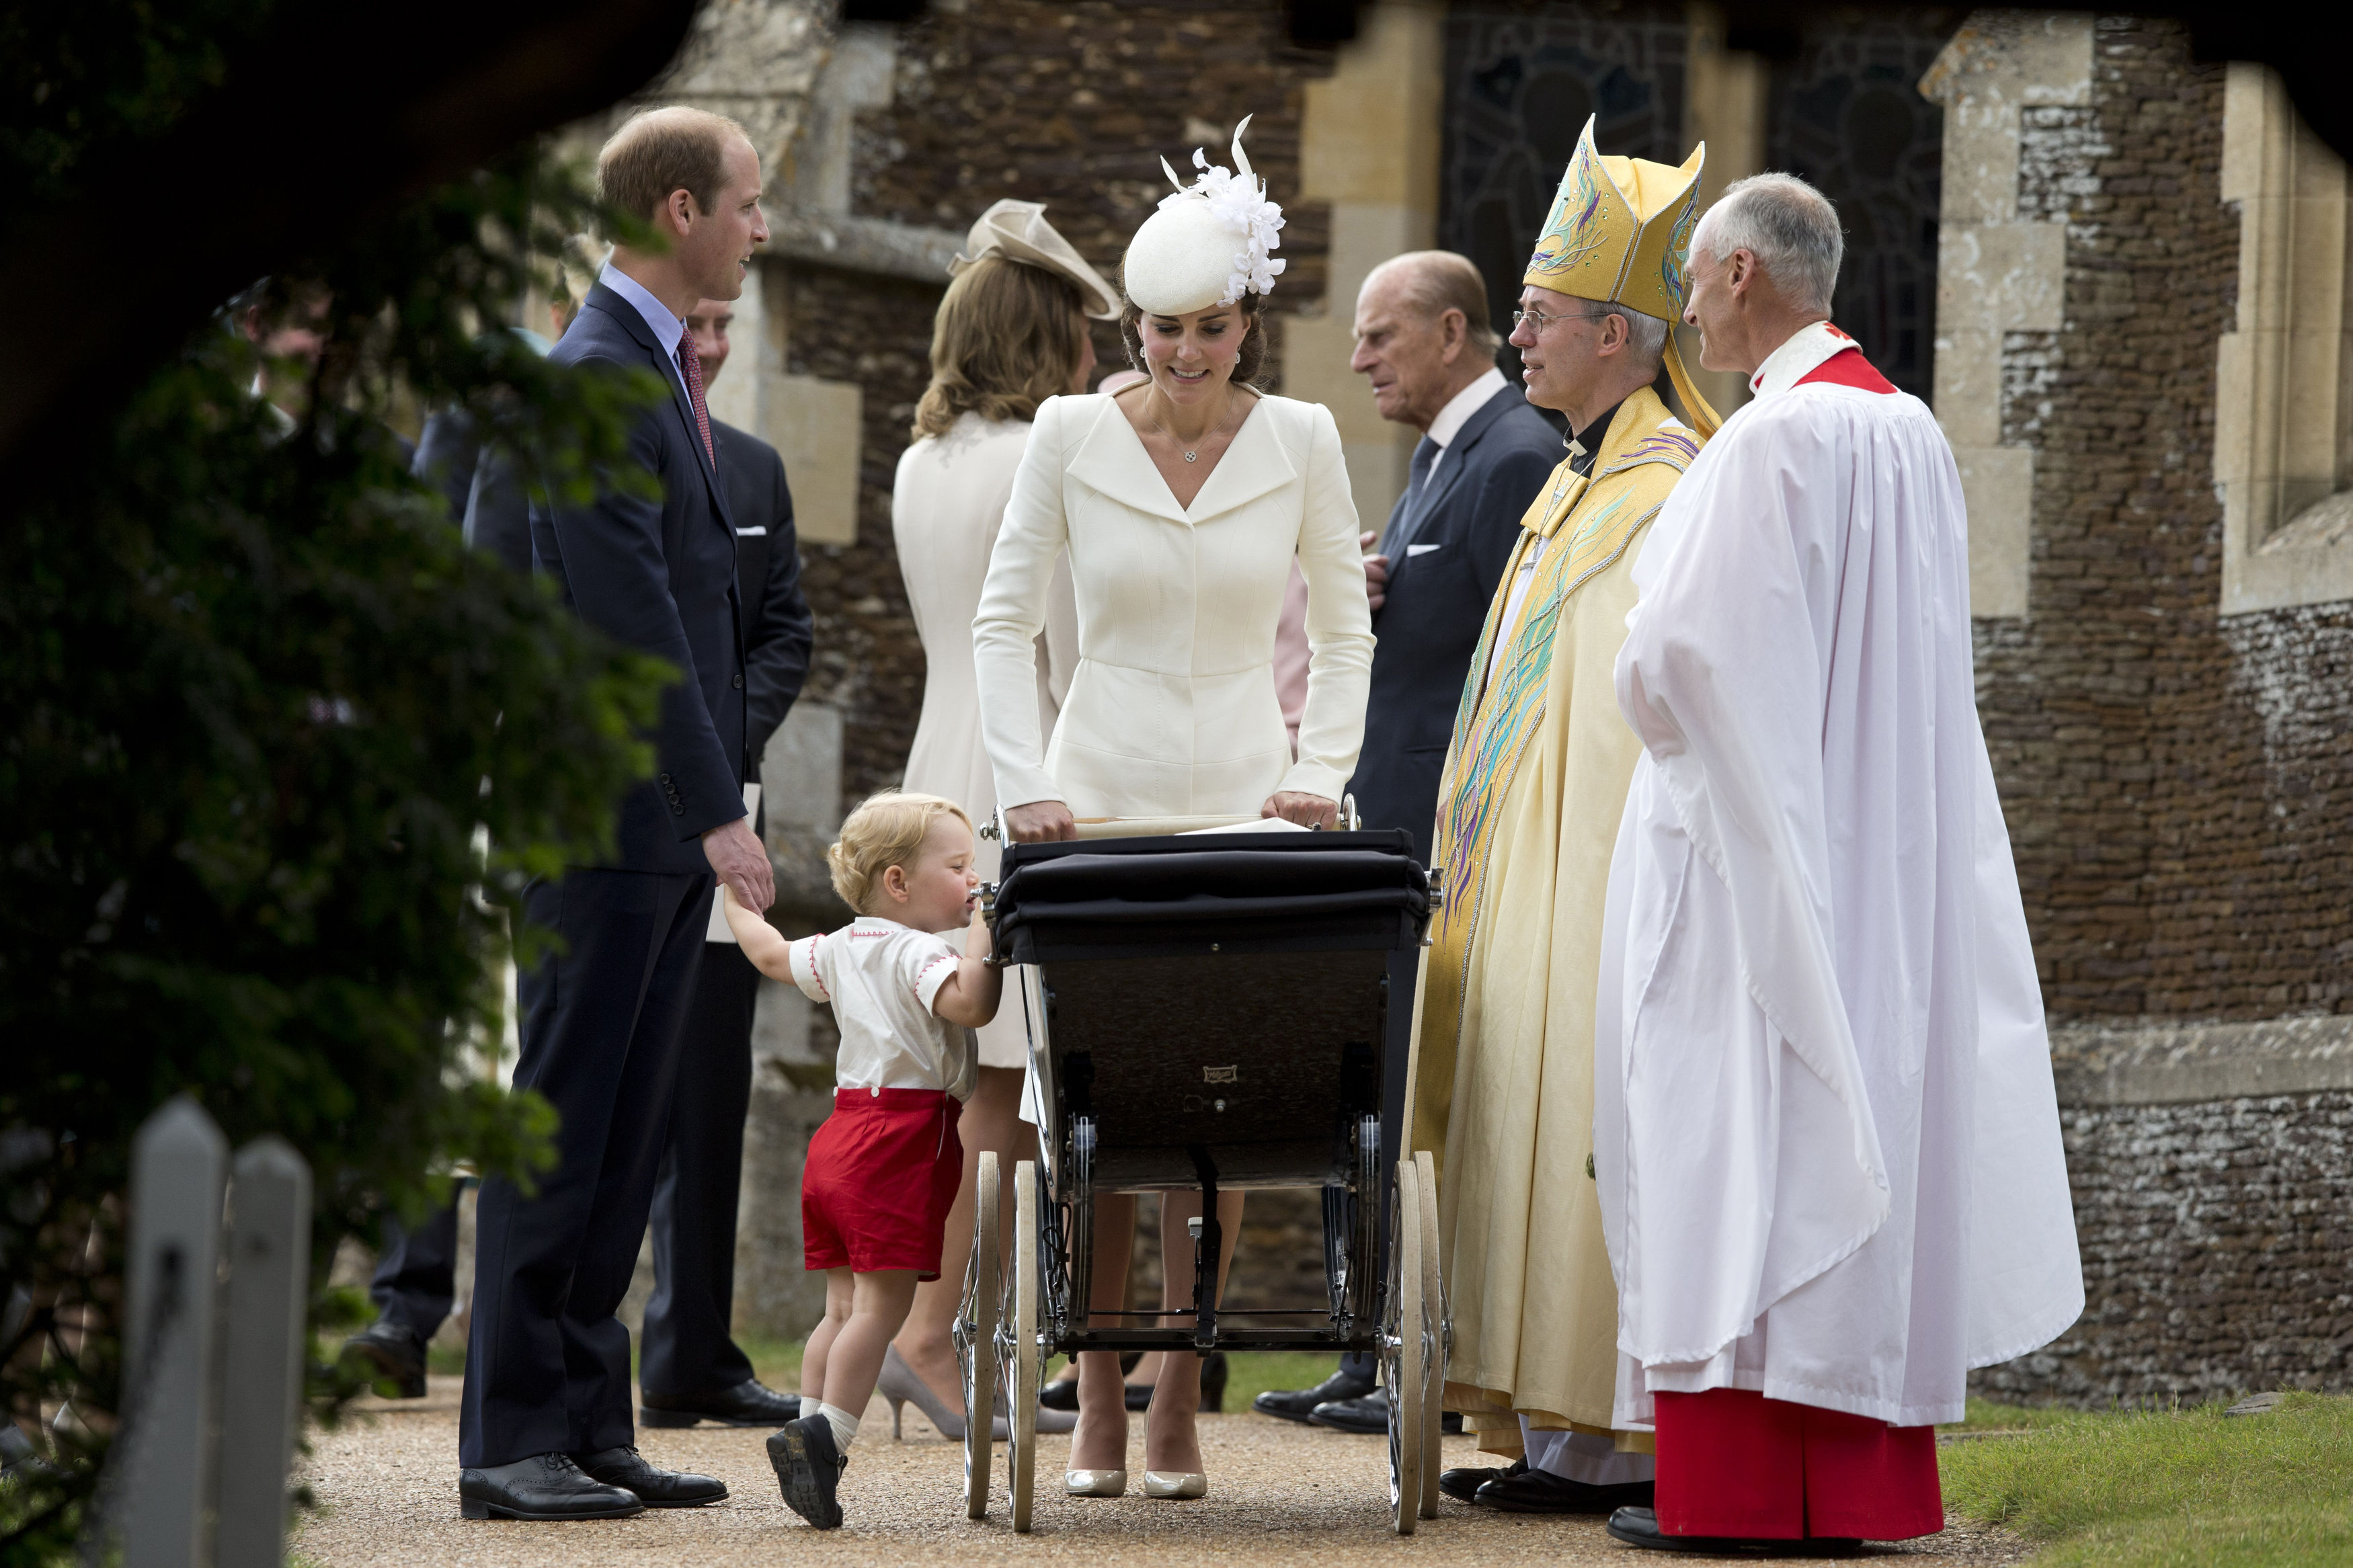 The Duke and Duchess of Cambridge with Prince George and Princess Charlotte with Archbishop of Canterbury Justin Welby (second right) as they leave the Church of St Mary Magdalene in Sandringham, England after Princess Charlotte's christening on July 5, 2015.